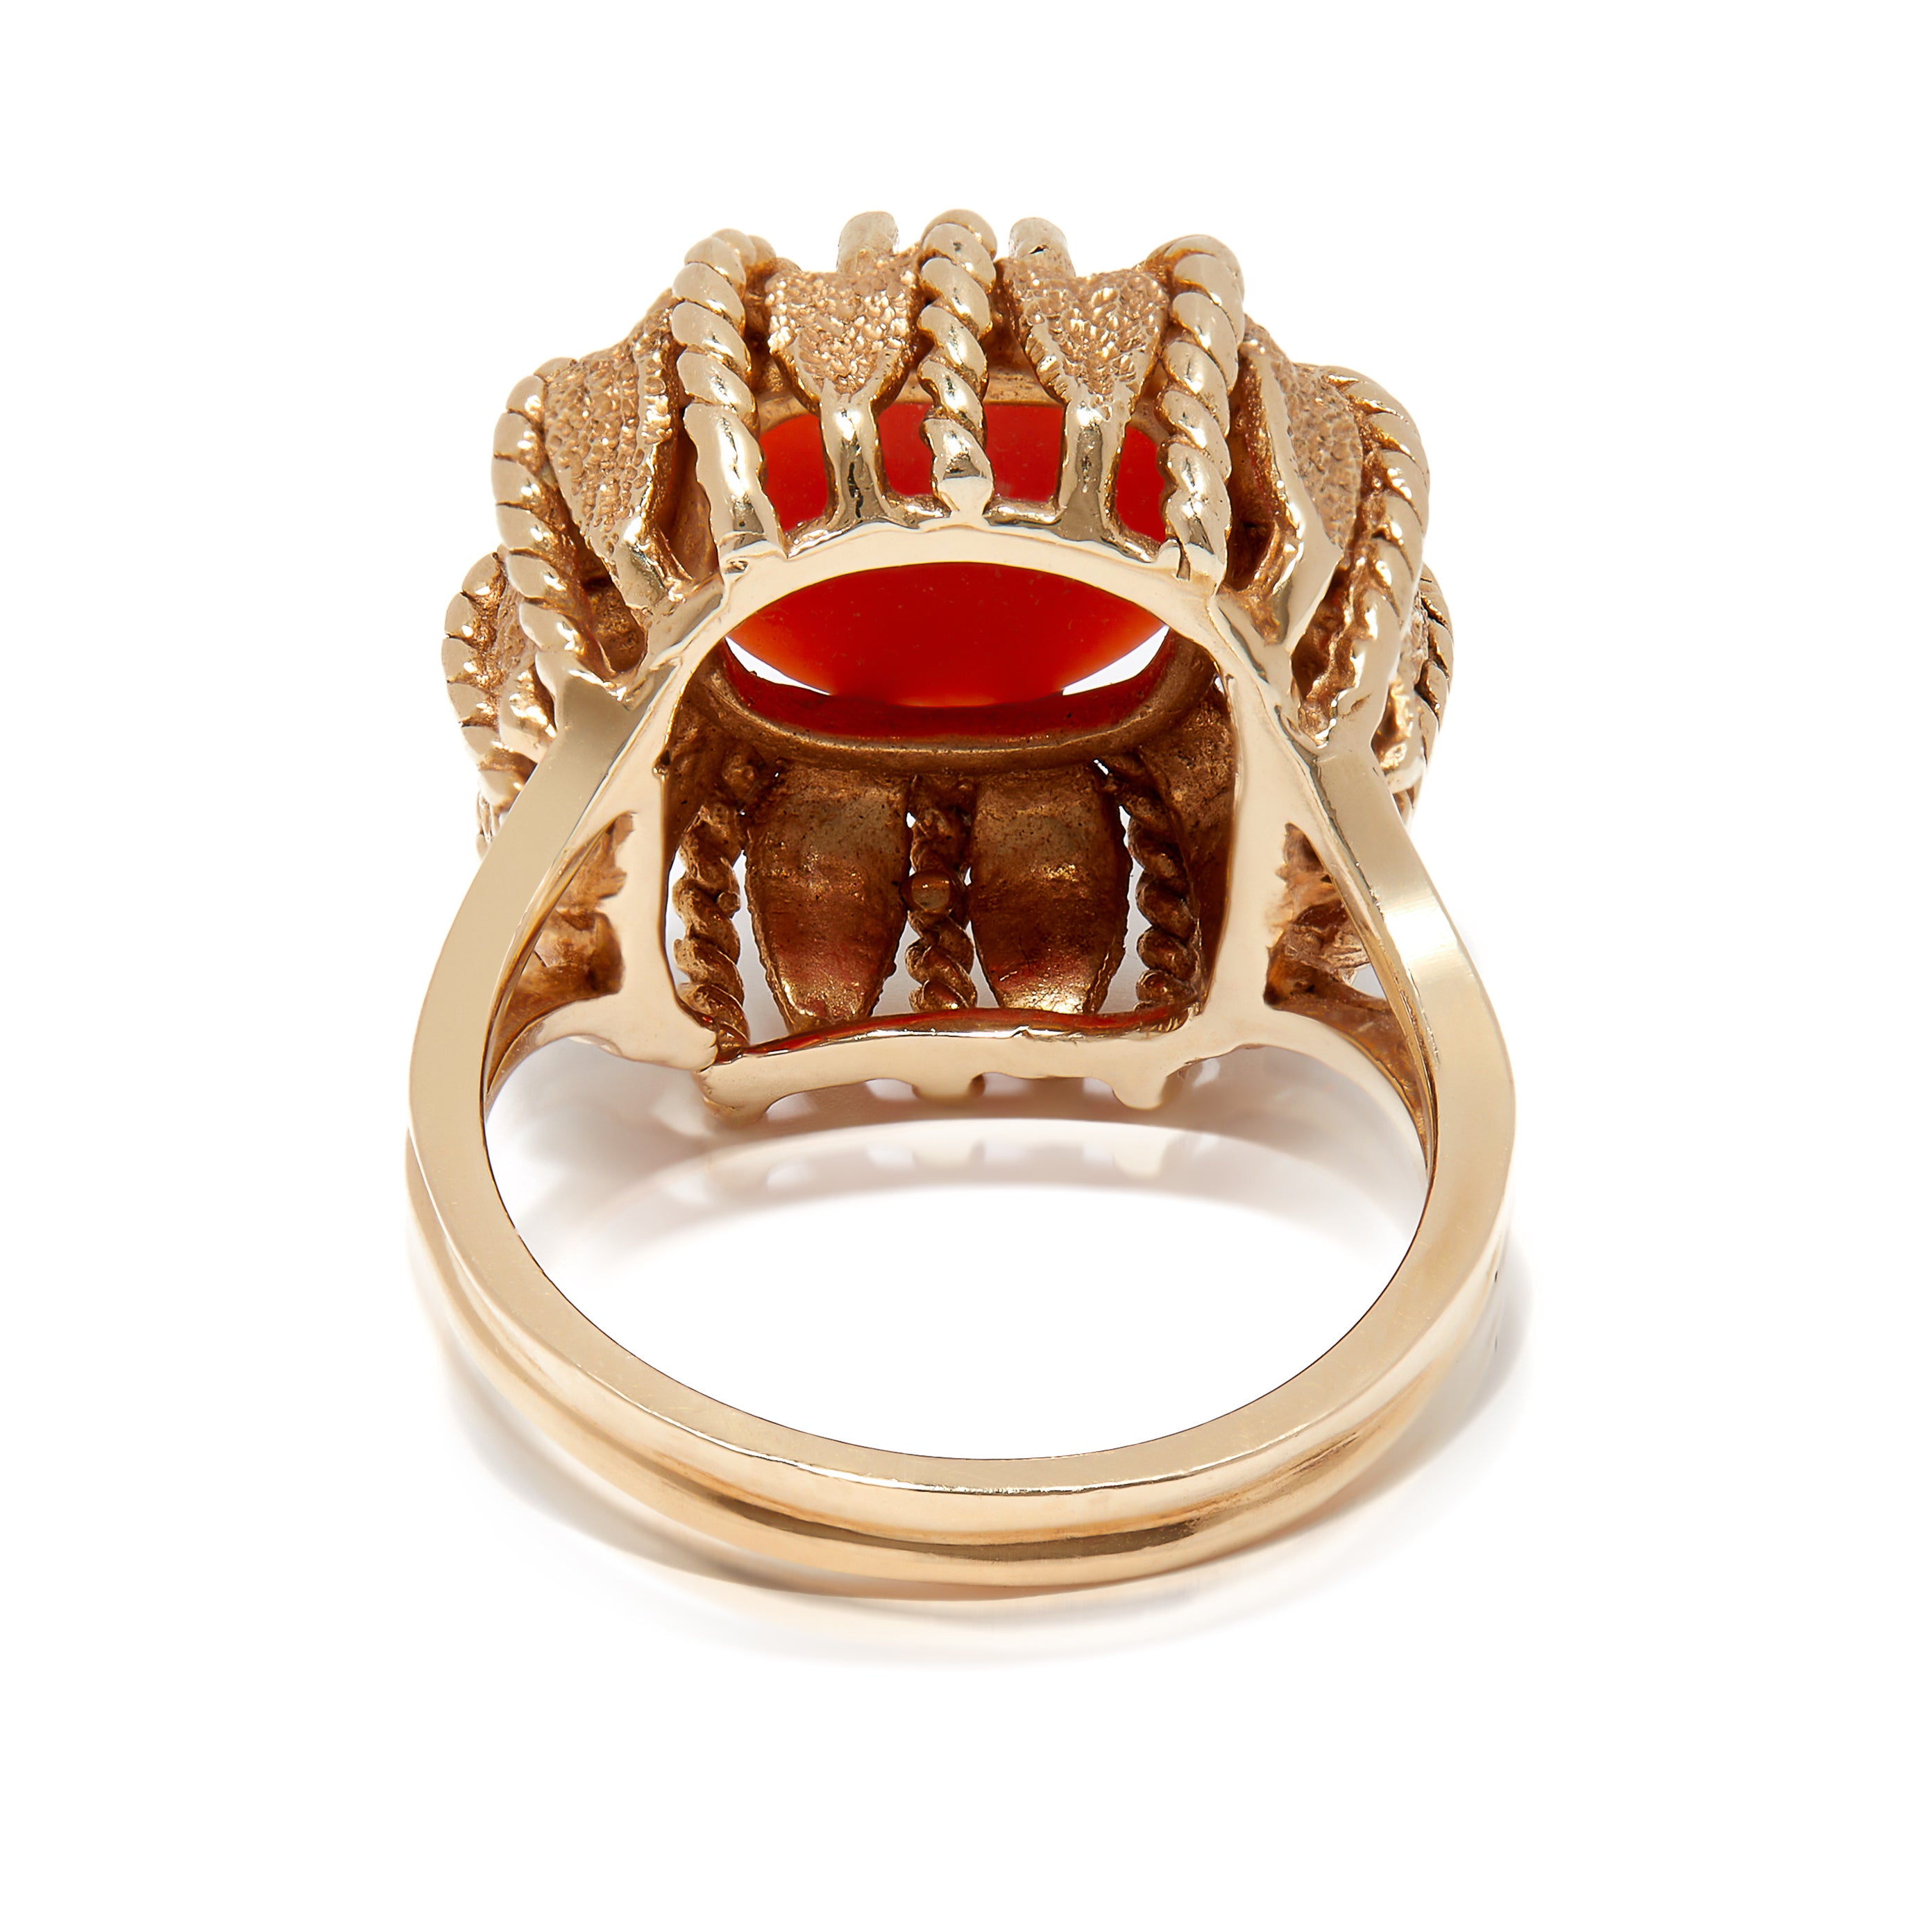 Back view of 1960s-1970s gold and coral cocktail ring. 